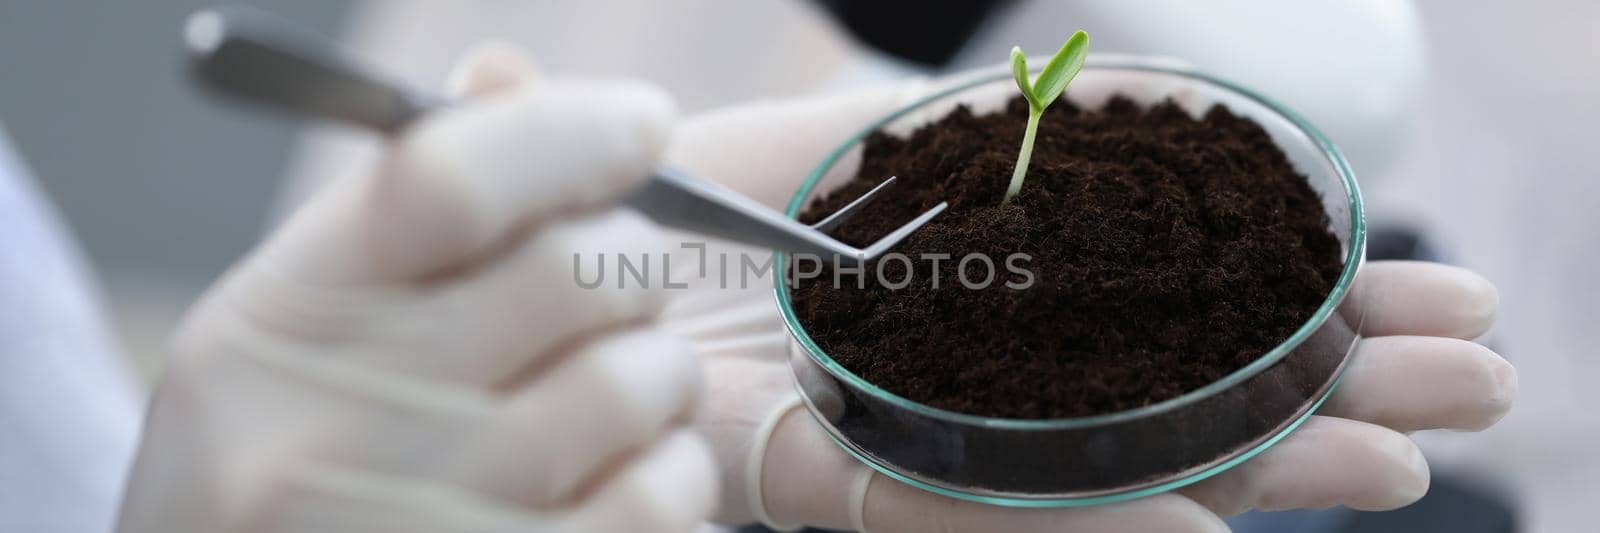 Close-up of scientist taking analysis of soil sample with young plant. Worker doing investigation in laboratory. Modern equipment, science, discovery, biology concept